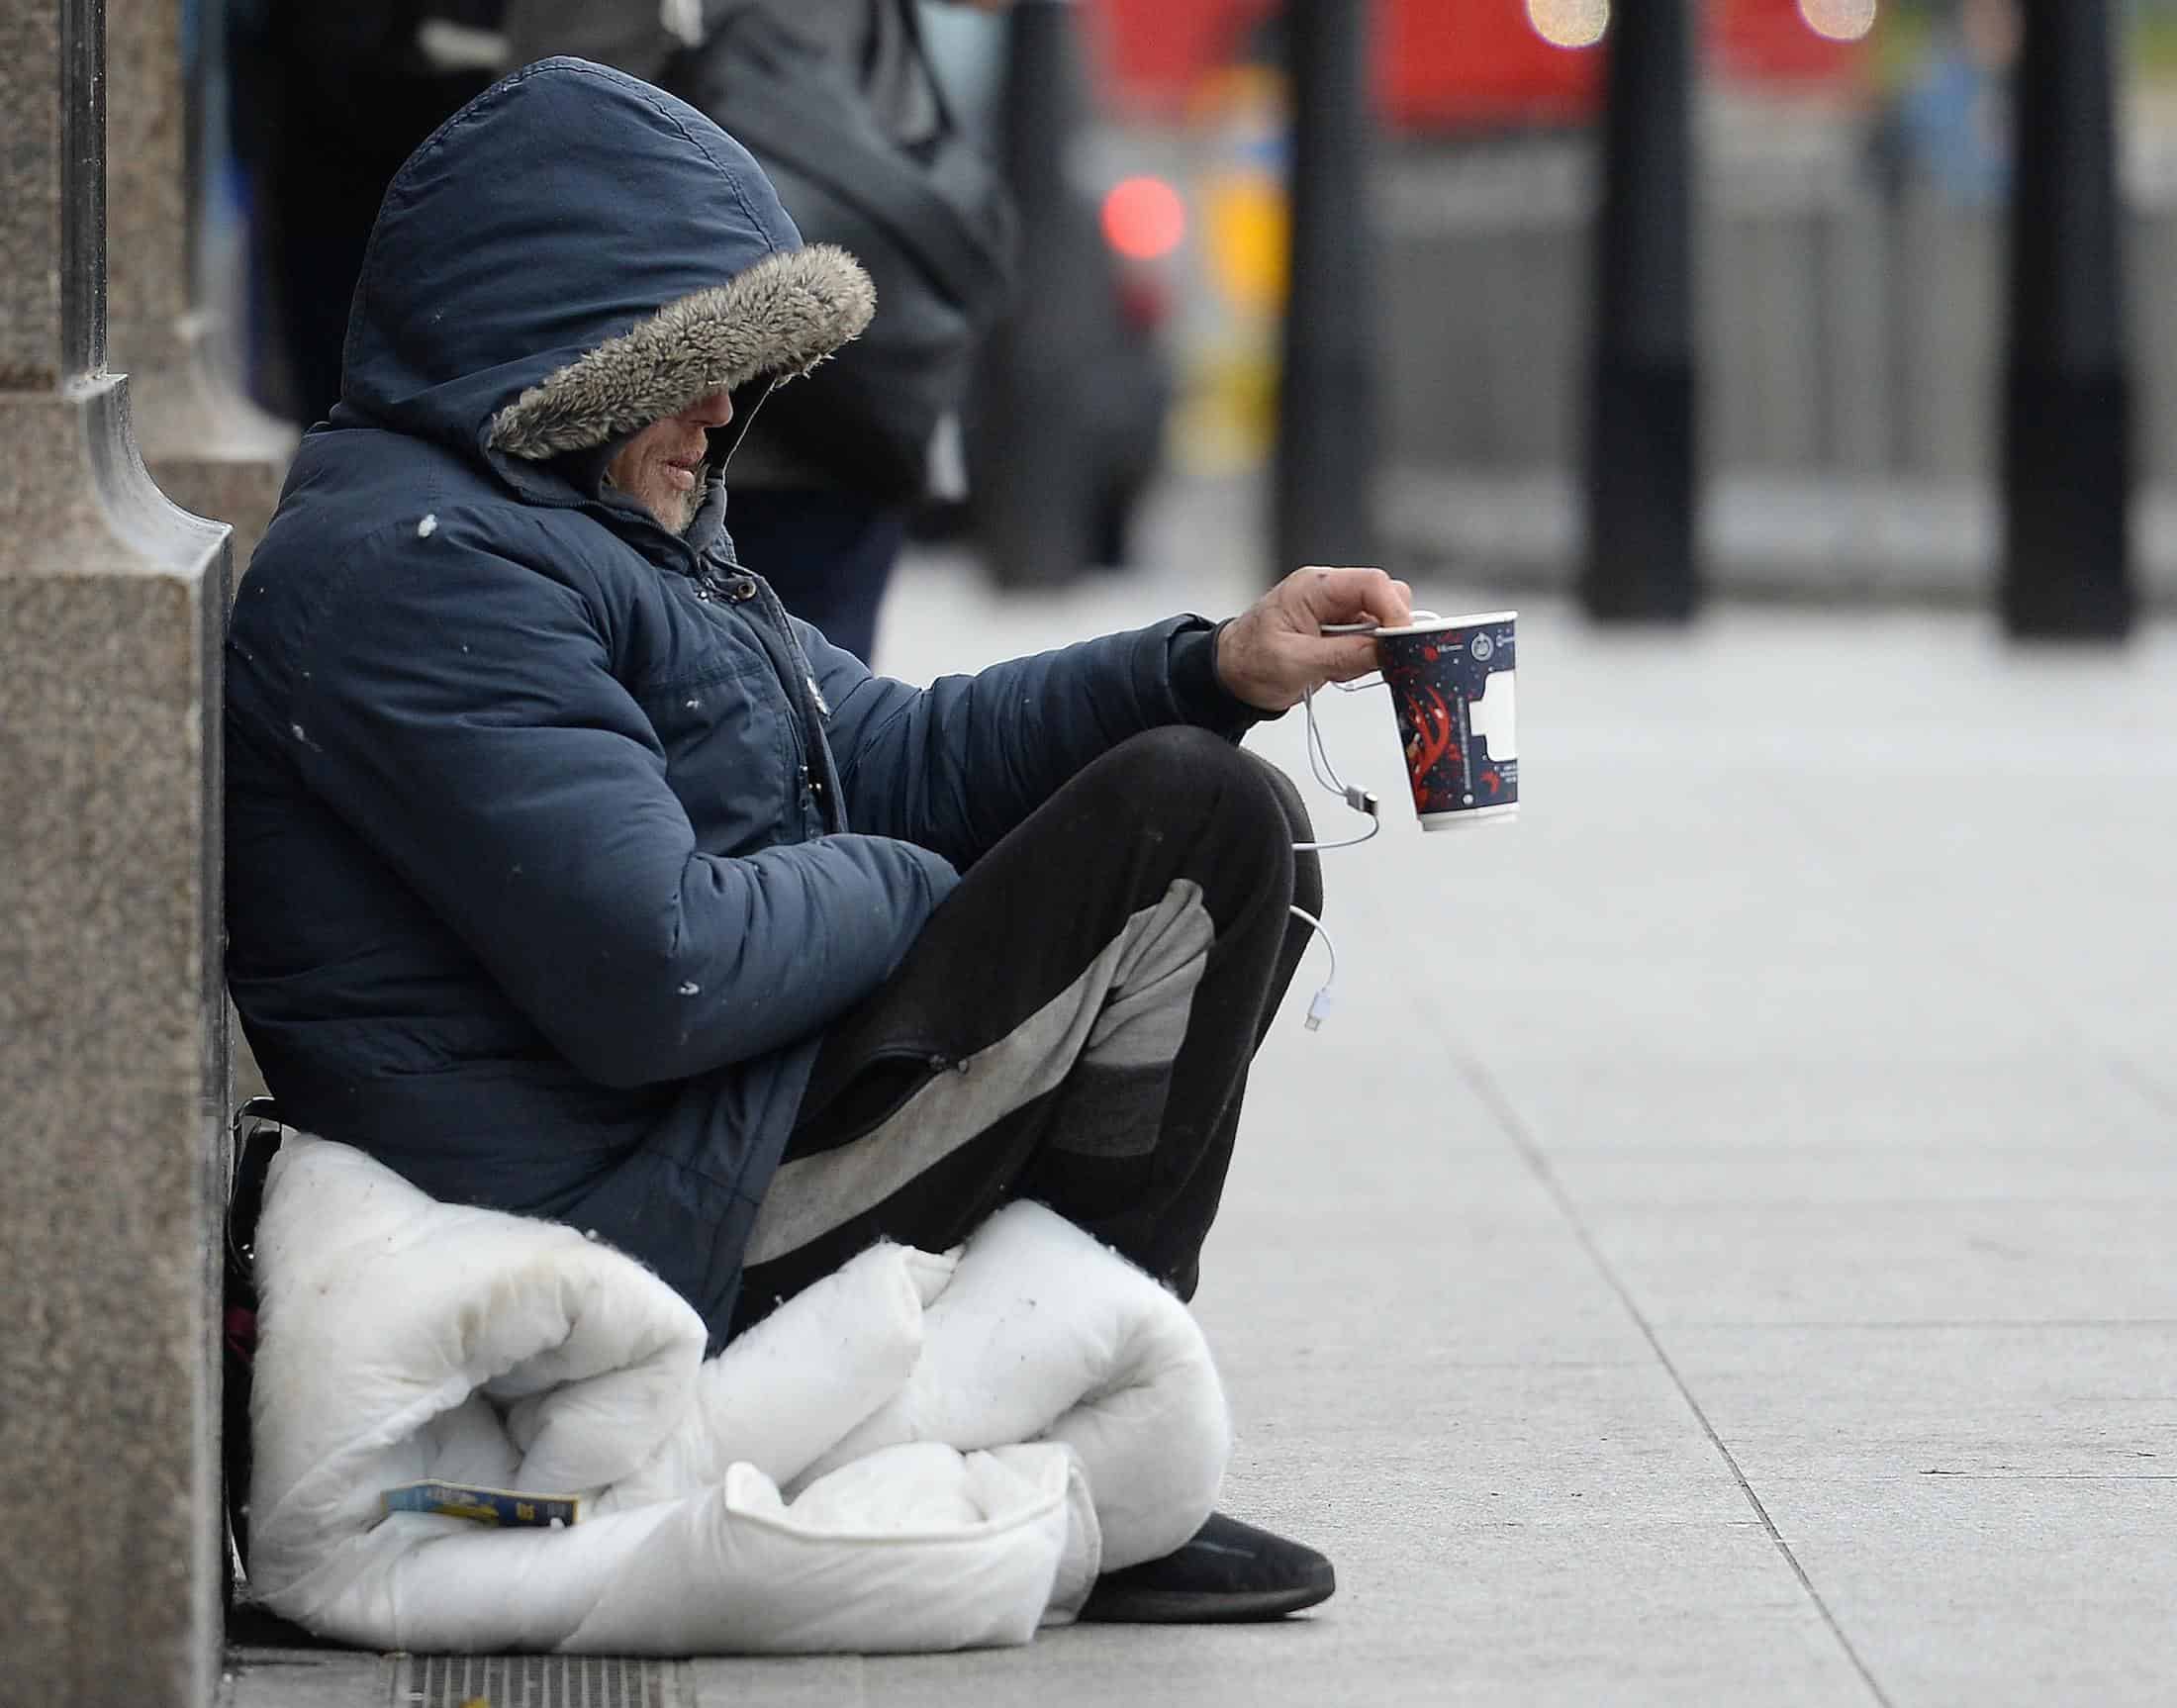 ‘This winter is terrifying’ as lives will be lost without action to protect rough sleepers